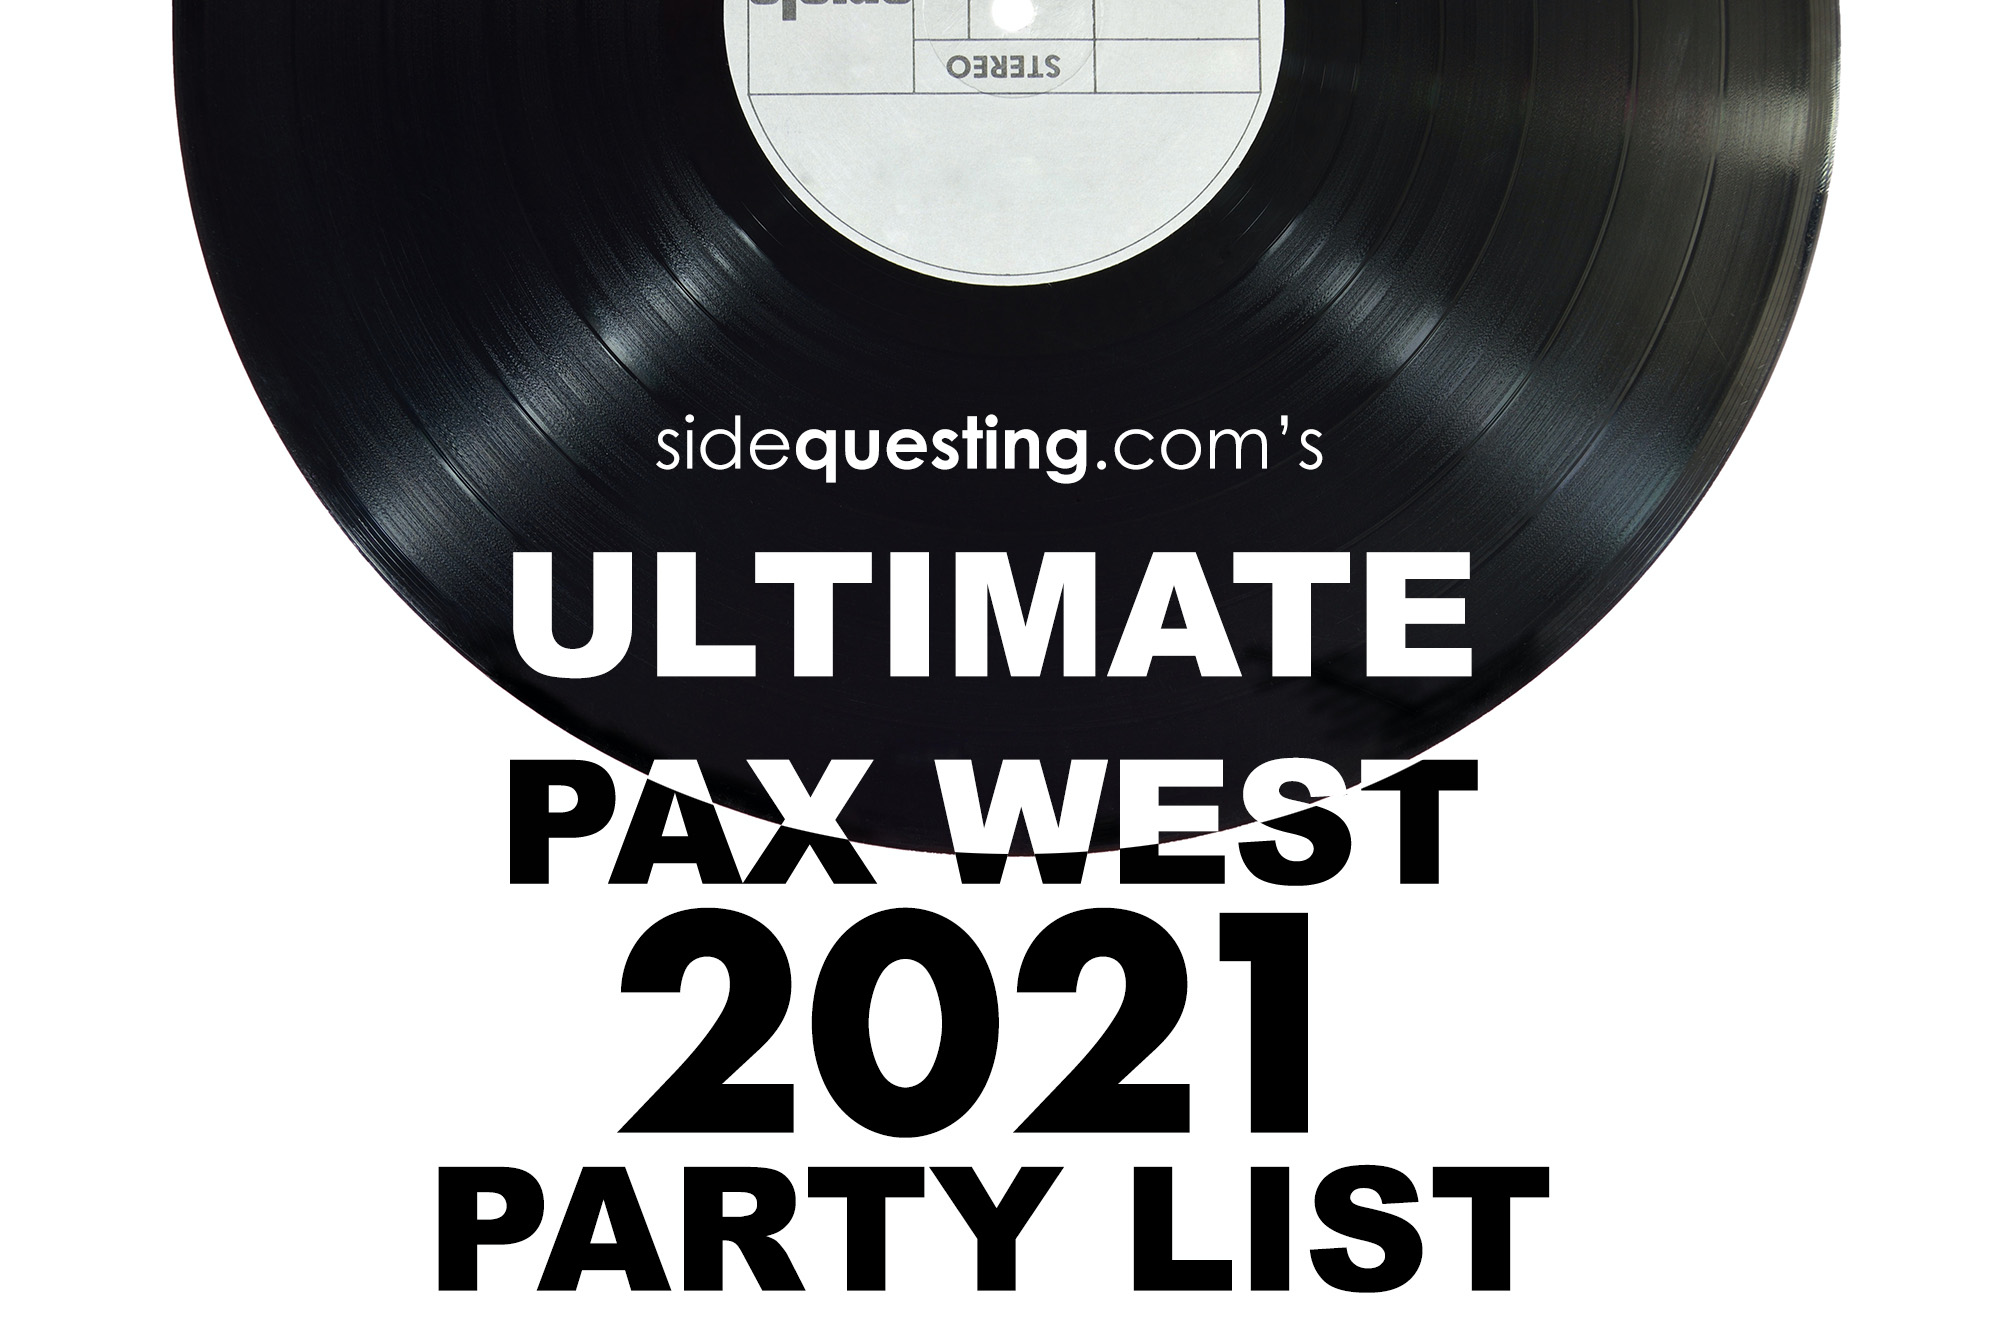 The PAX West 2021 Party List: Your ULTIMATE guide to the parties and events